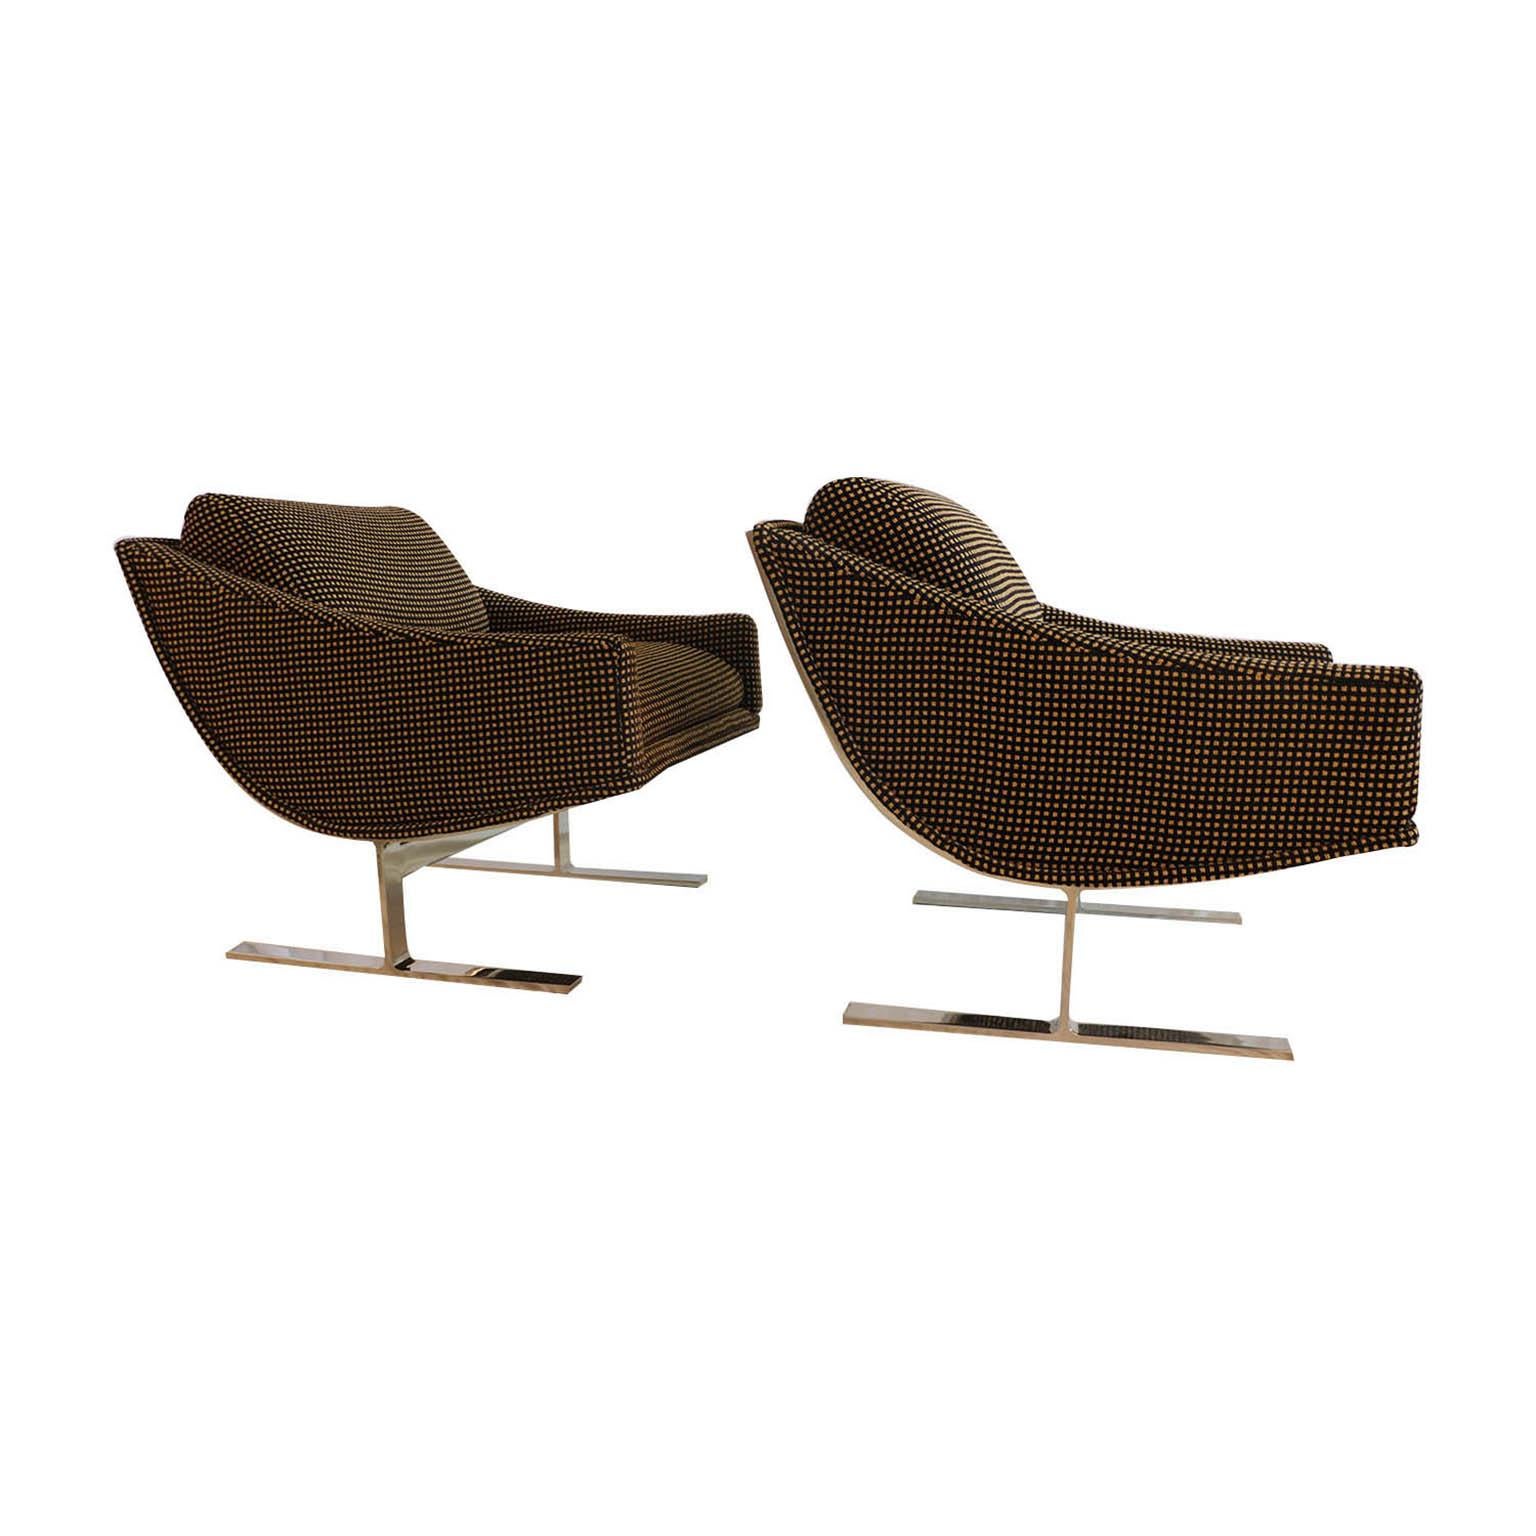 Midcentury Kipp Stewart “Arc Lounge Chairs” for Directional For Sale 2